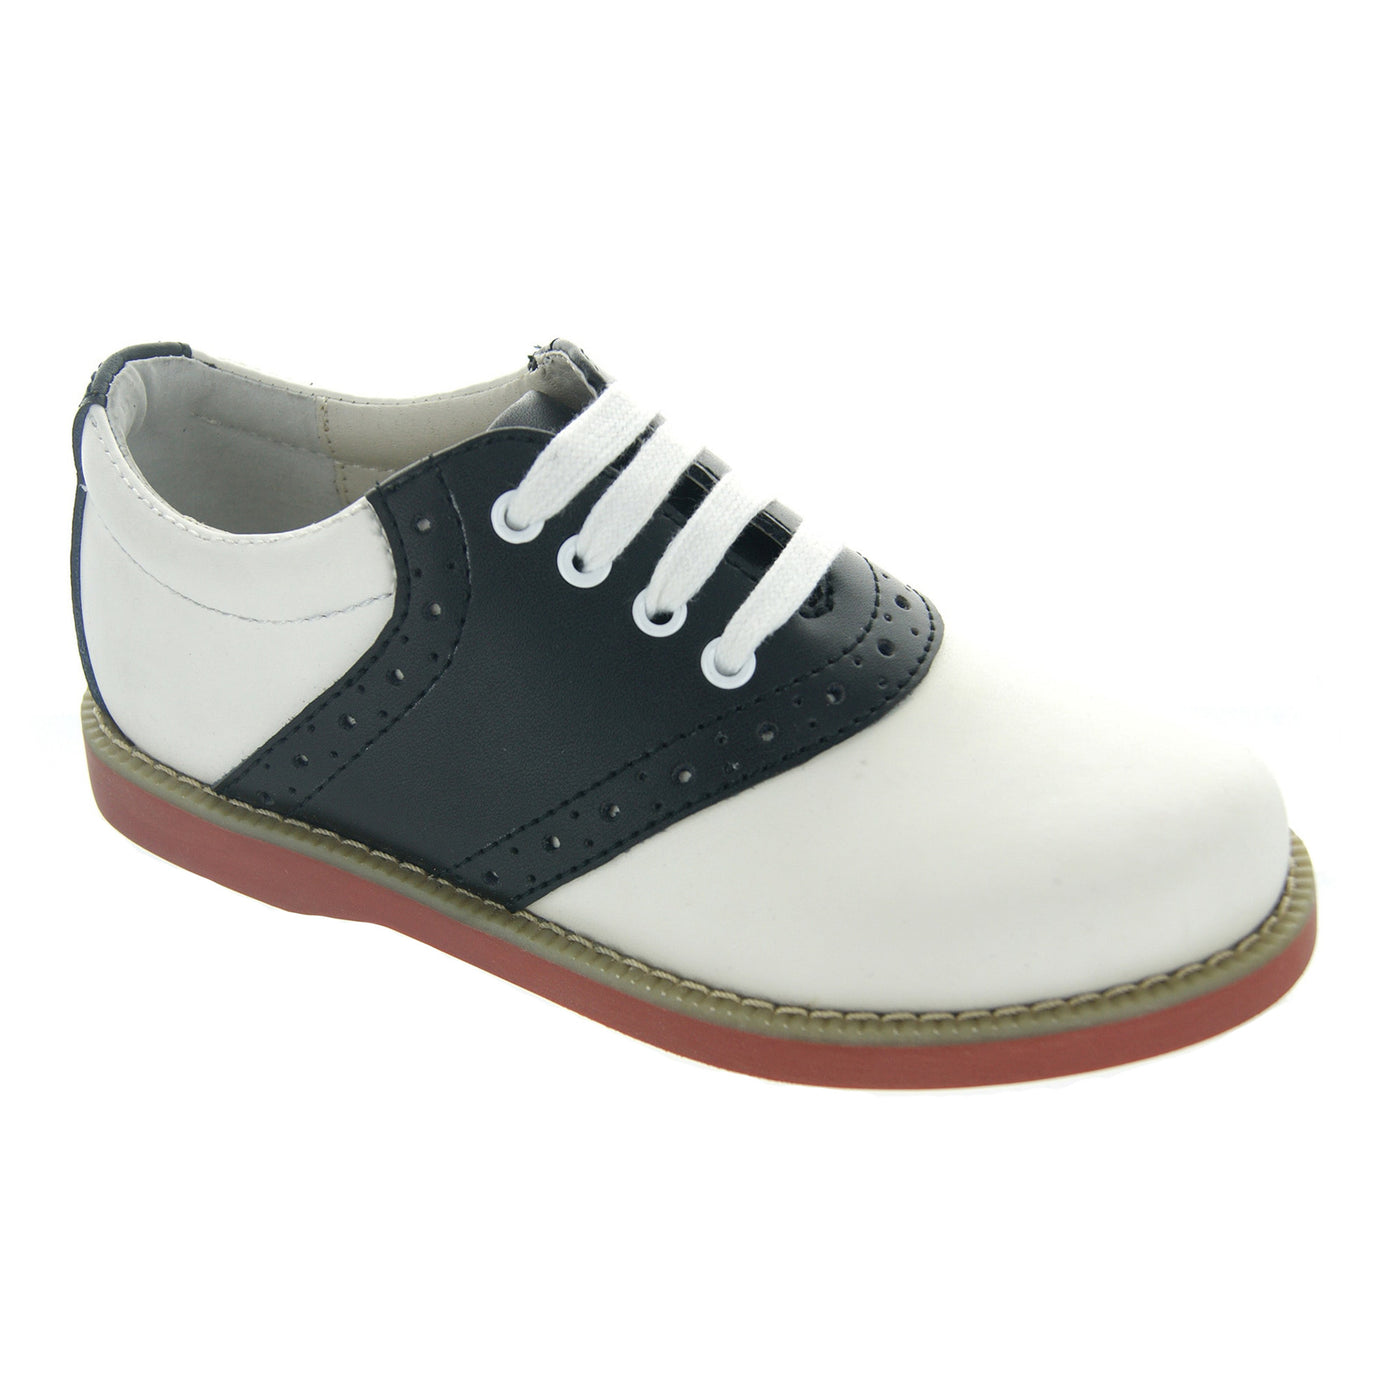 Young Ladies Black/White Oxford Shoes 